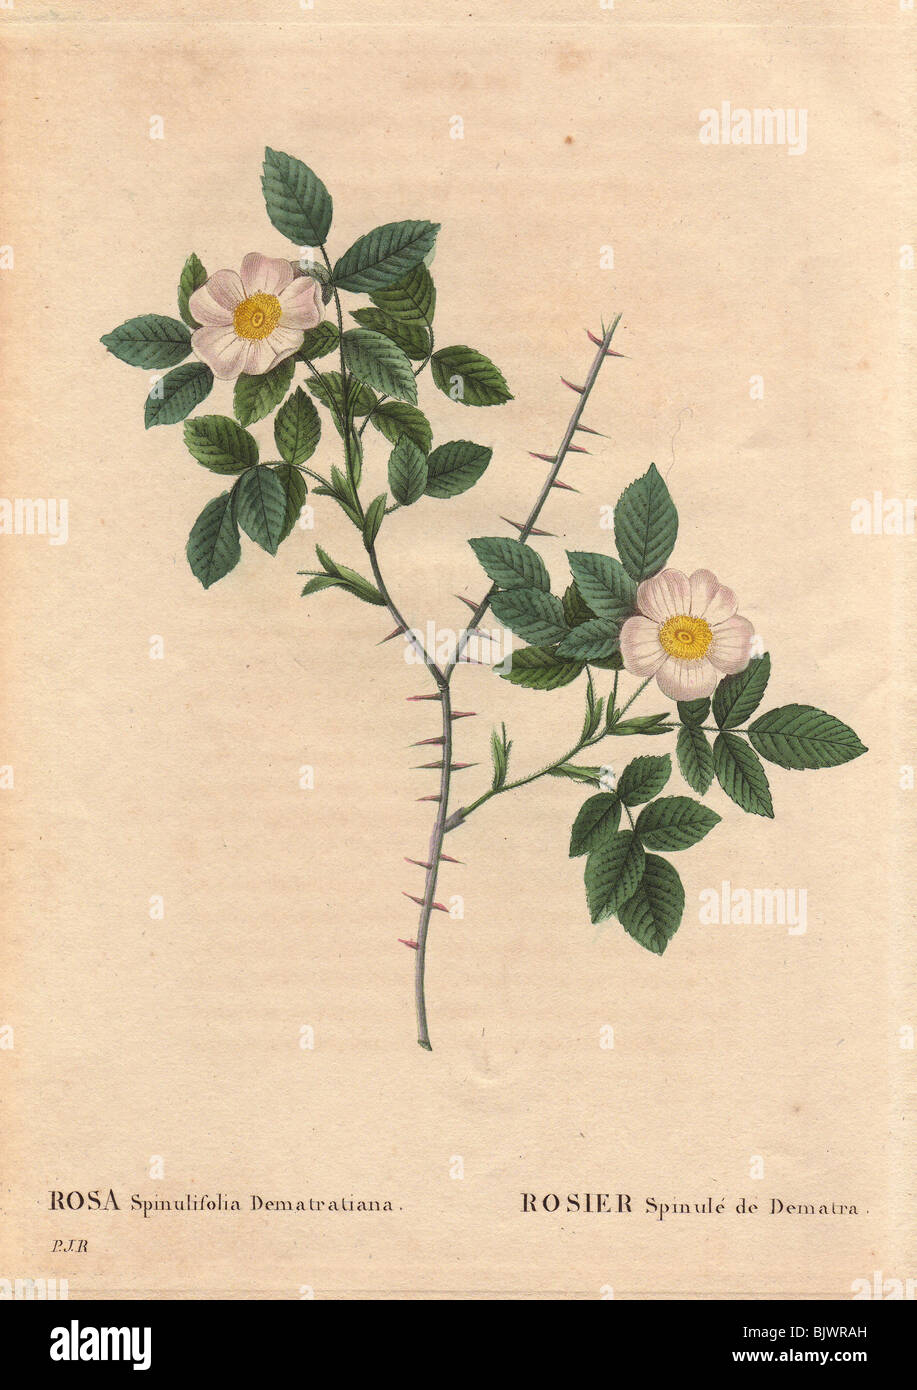 Spiny leaved rose of Dematra with white and yellow flowers (Rosa spinulifolia dematratiana). Stock Photo